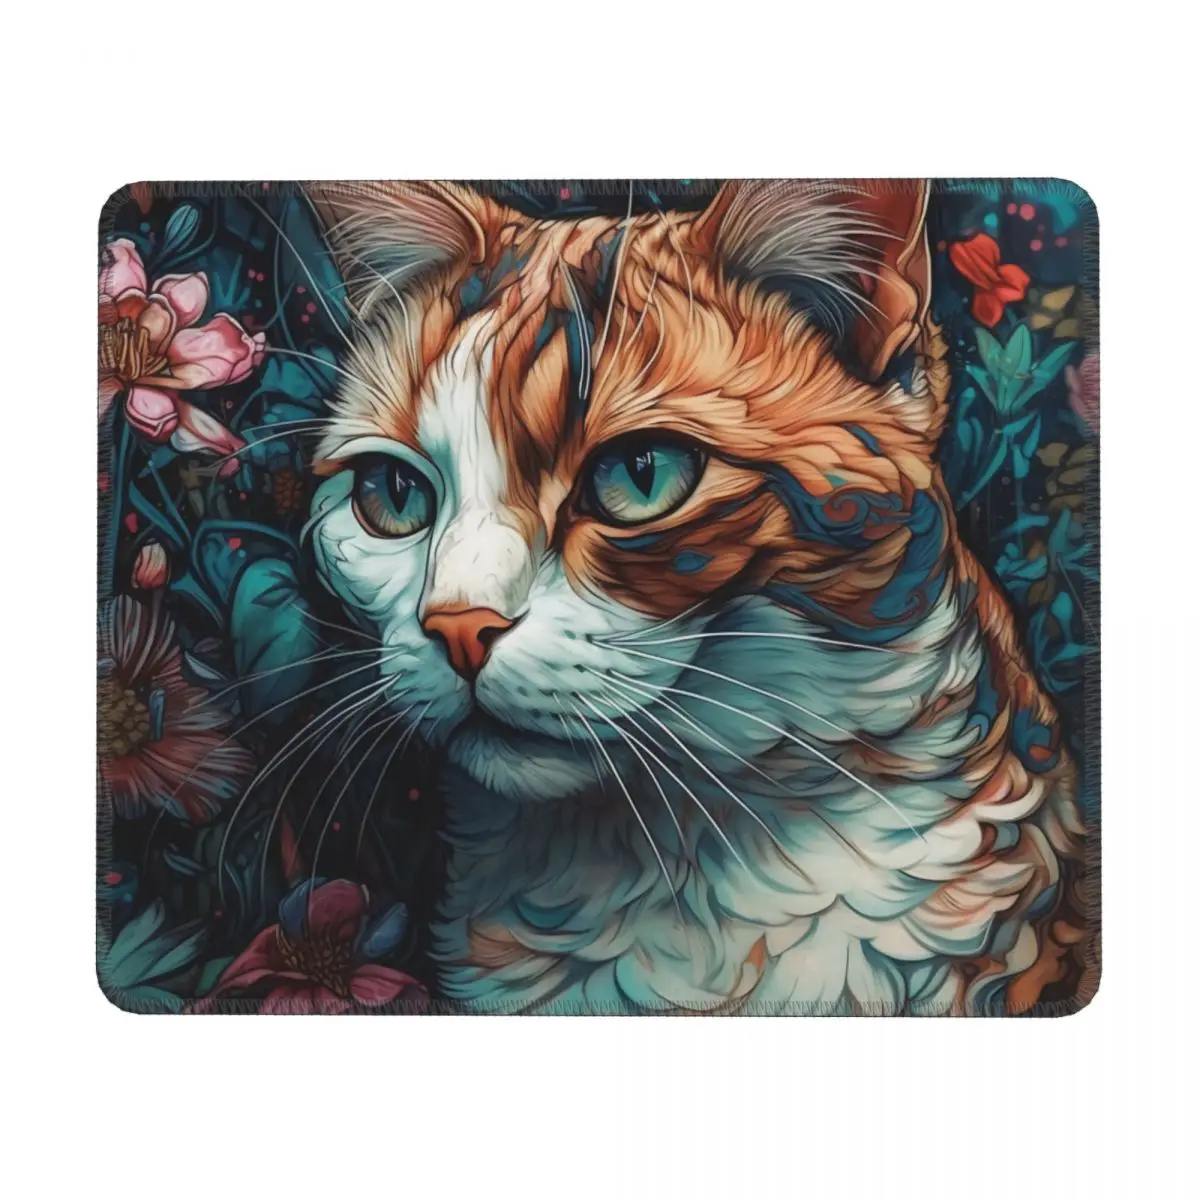 

Cat Horizontal Print Mouse Pad Neon Colorful Painting Quality Rubber Mousepad Anti Fatigue Rertro Desk Mouse Pads